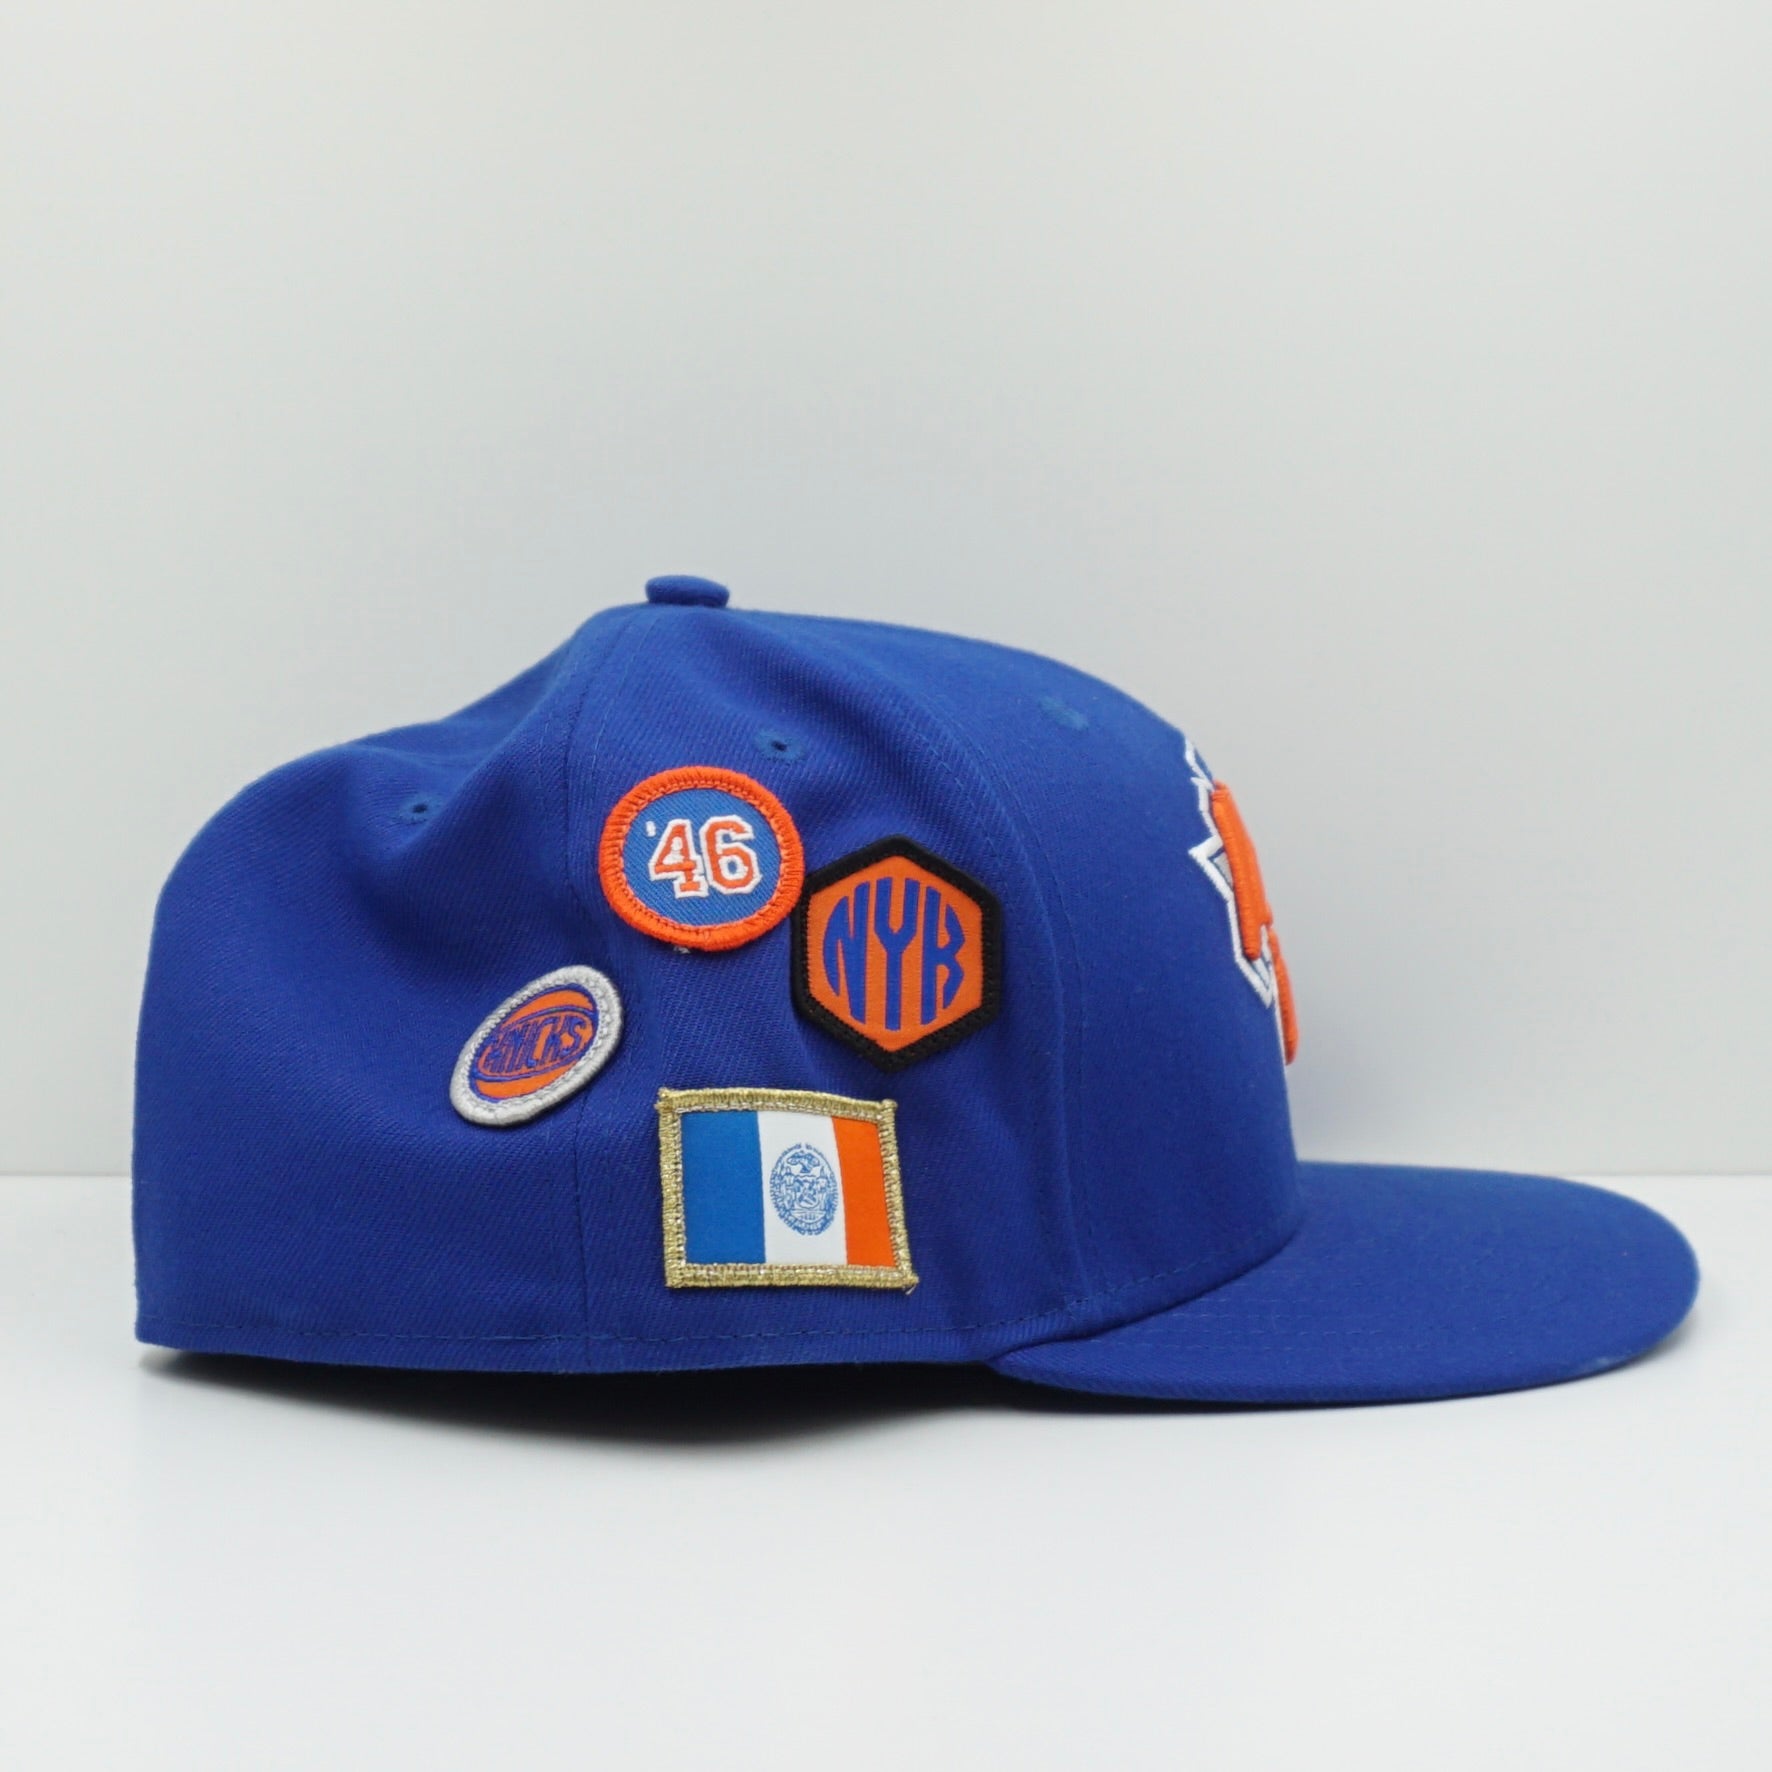 New Era New York Knicks Patches Fitted Cap